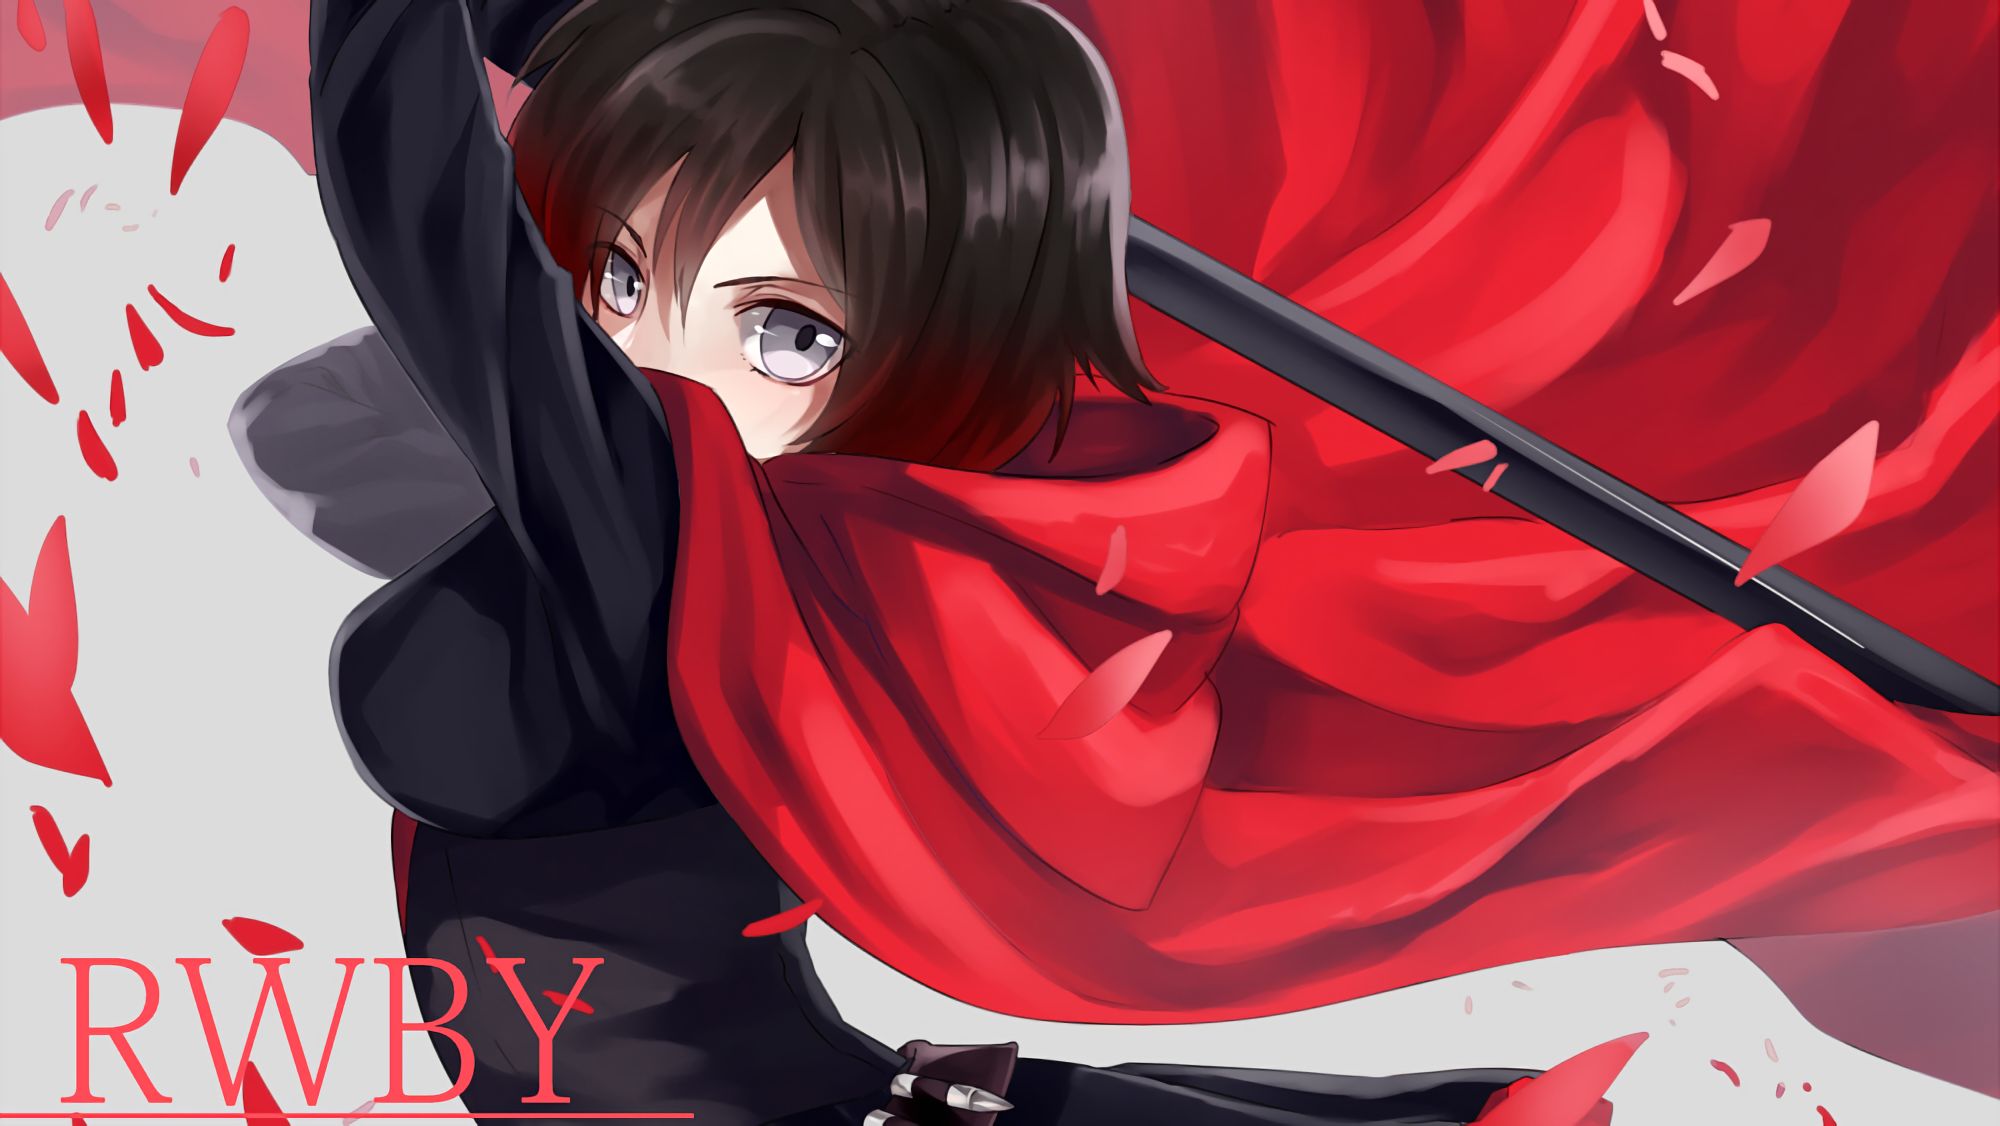 Anime Ruby Wallpapers - Wallpaper Cave